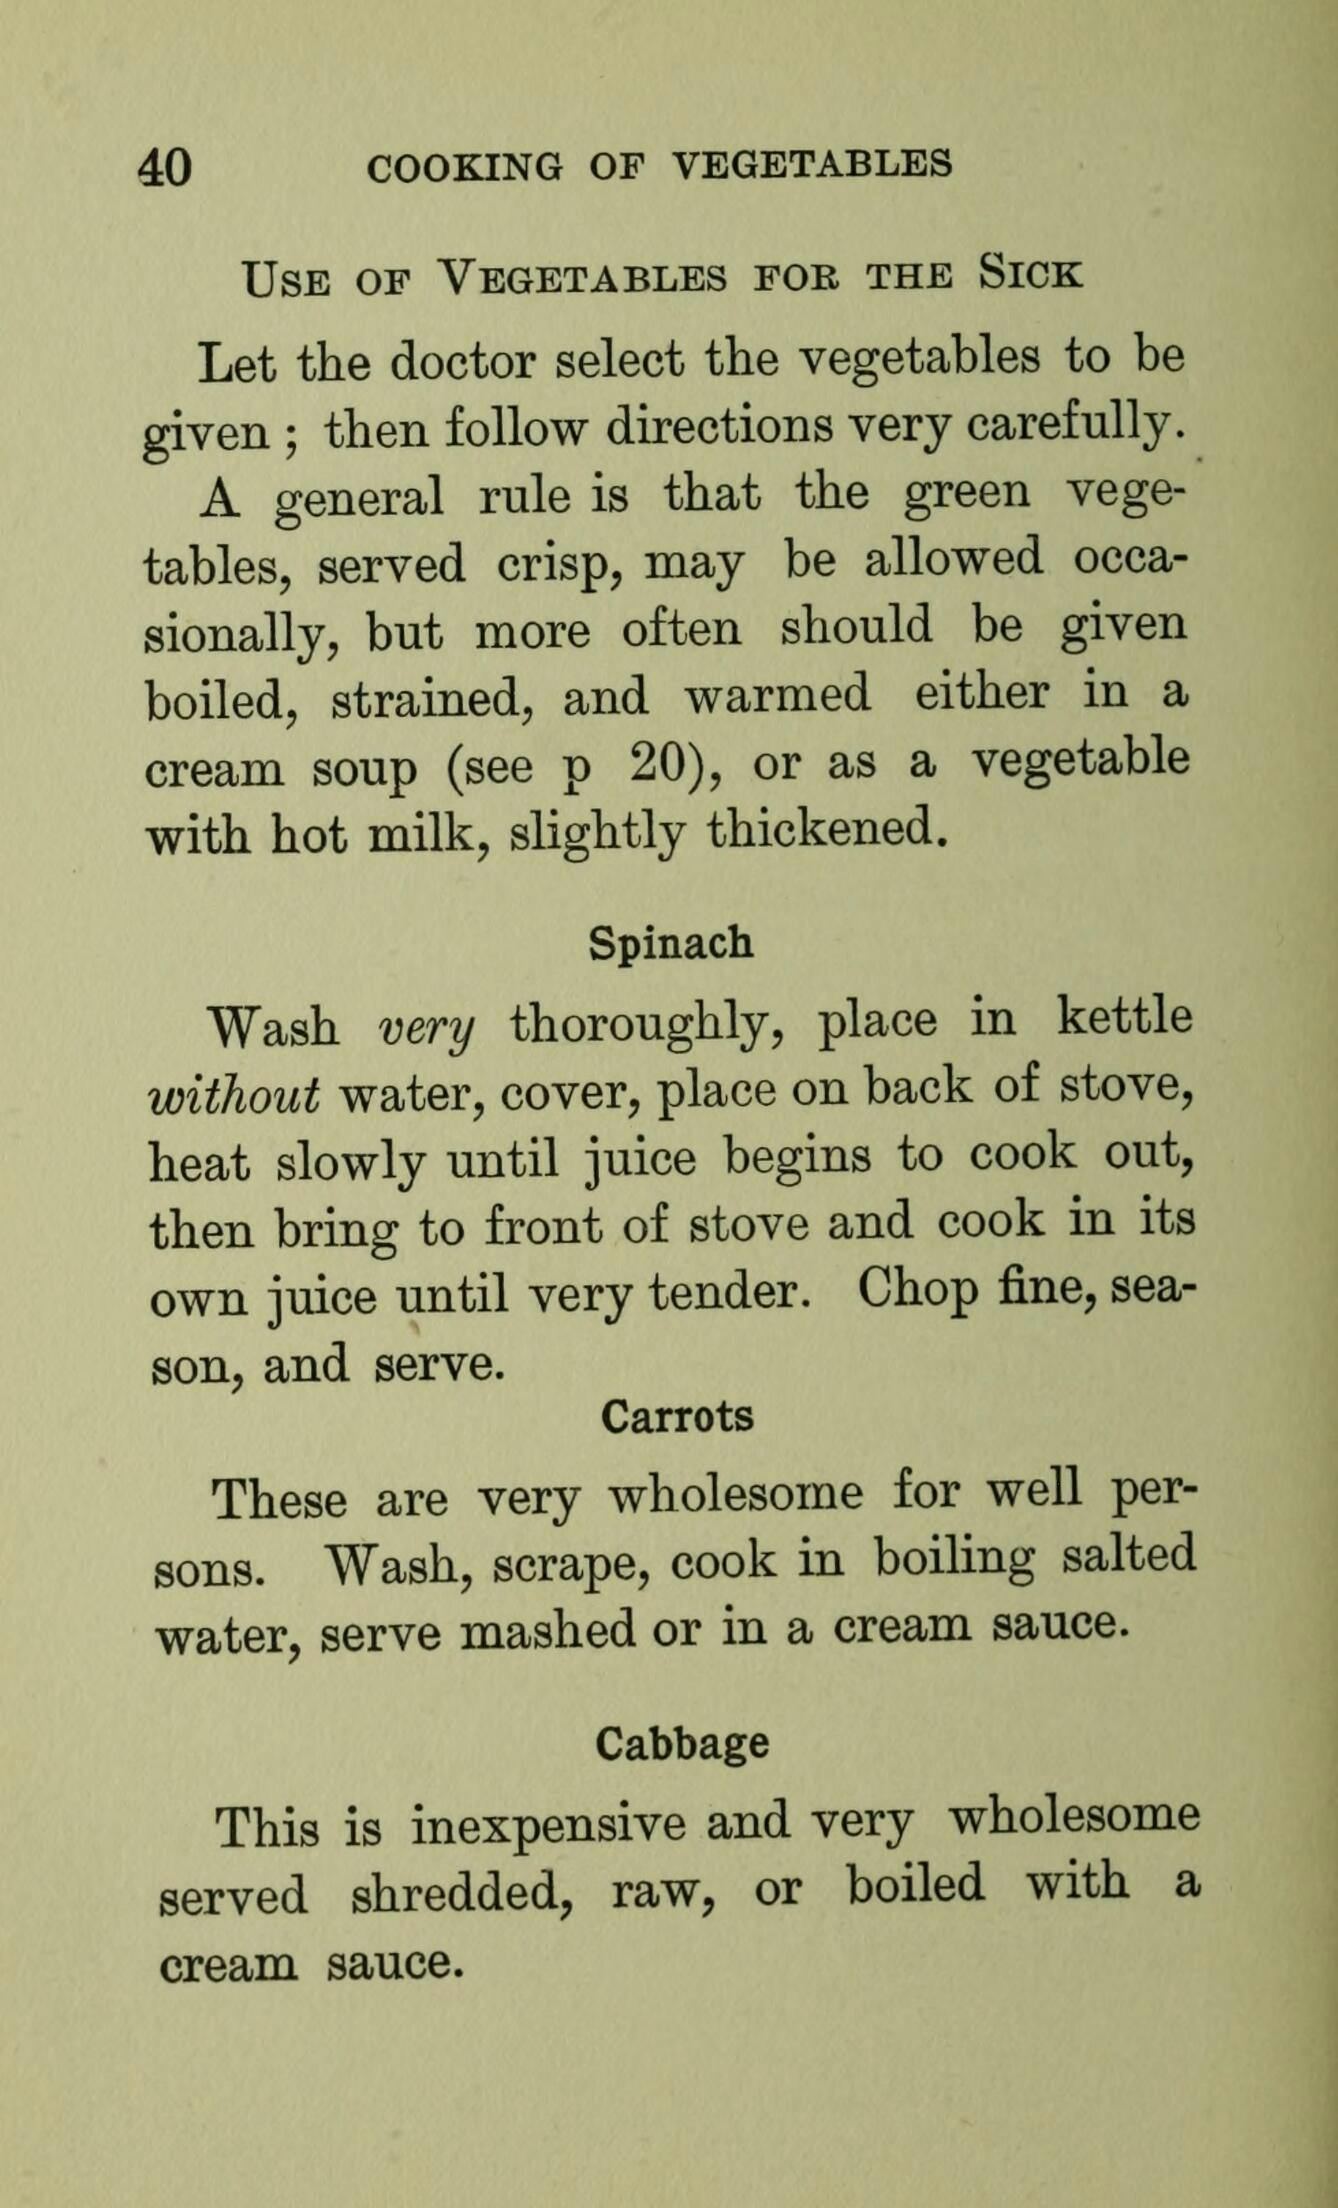 Page 40 from 'Food for the invalid and convalescent' by Winifred S. Gibbs. The page details the 'Use of Vegetables for the Sick' and has preparation instructions for spinach, carrots and cabbage. 